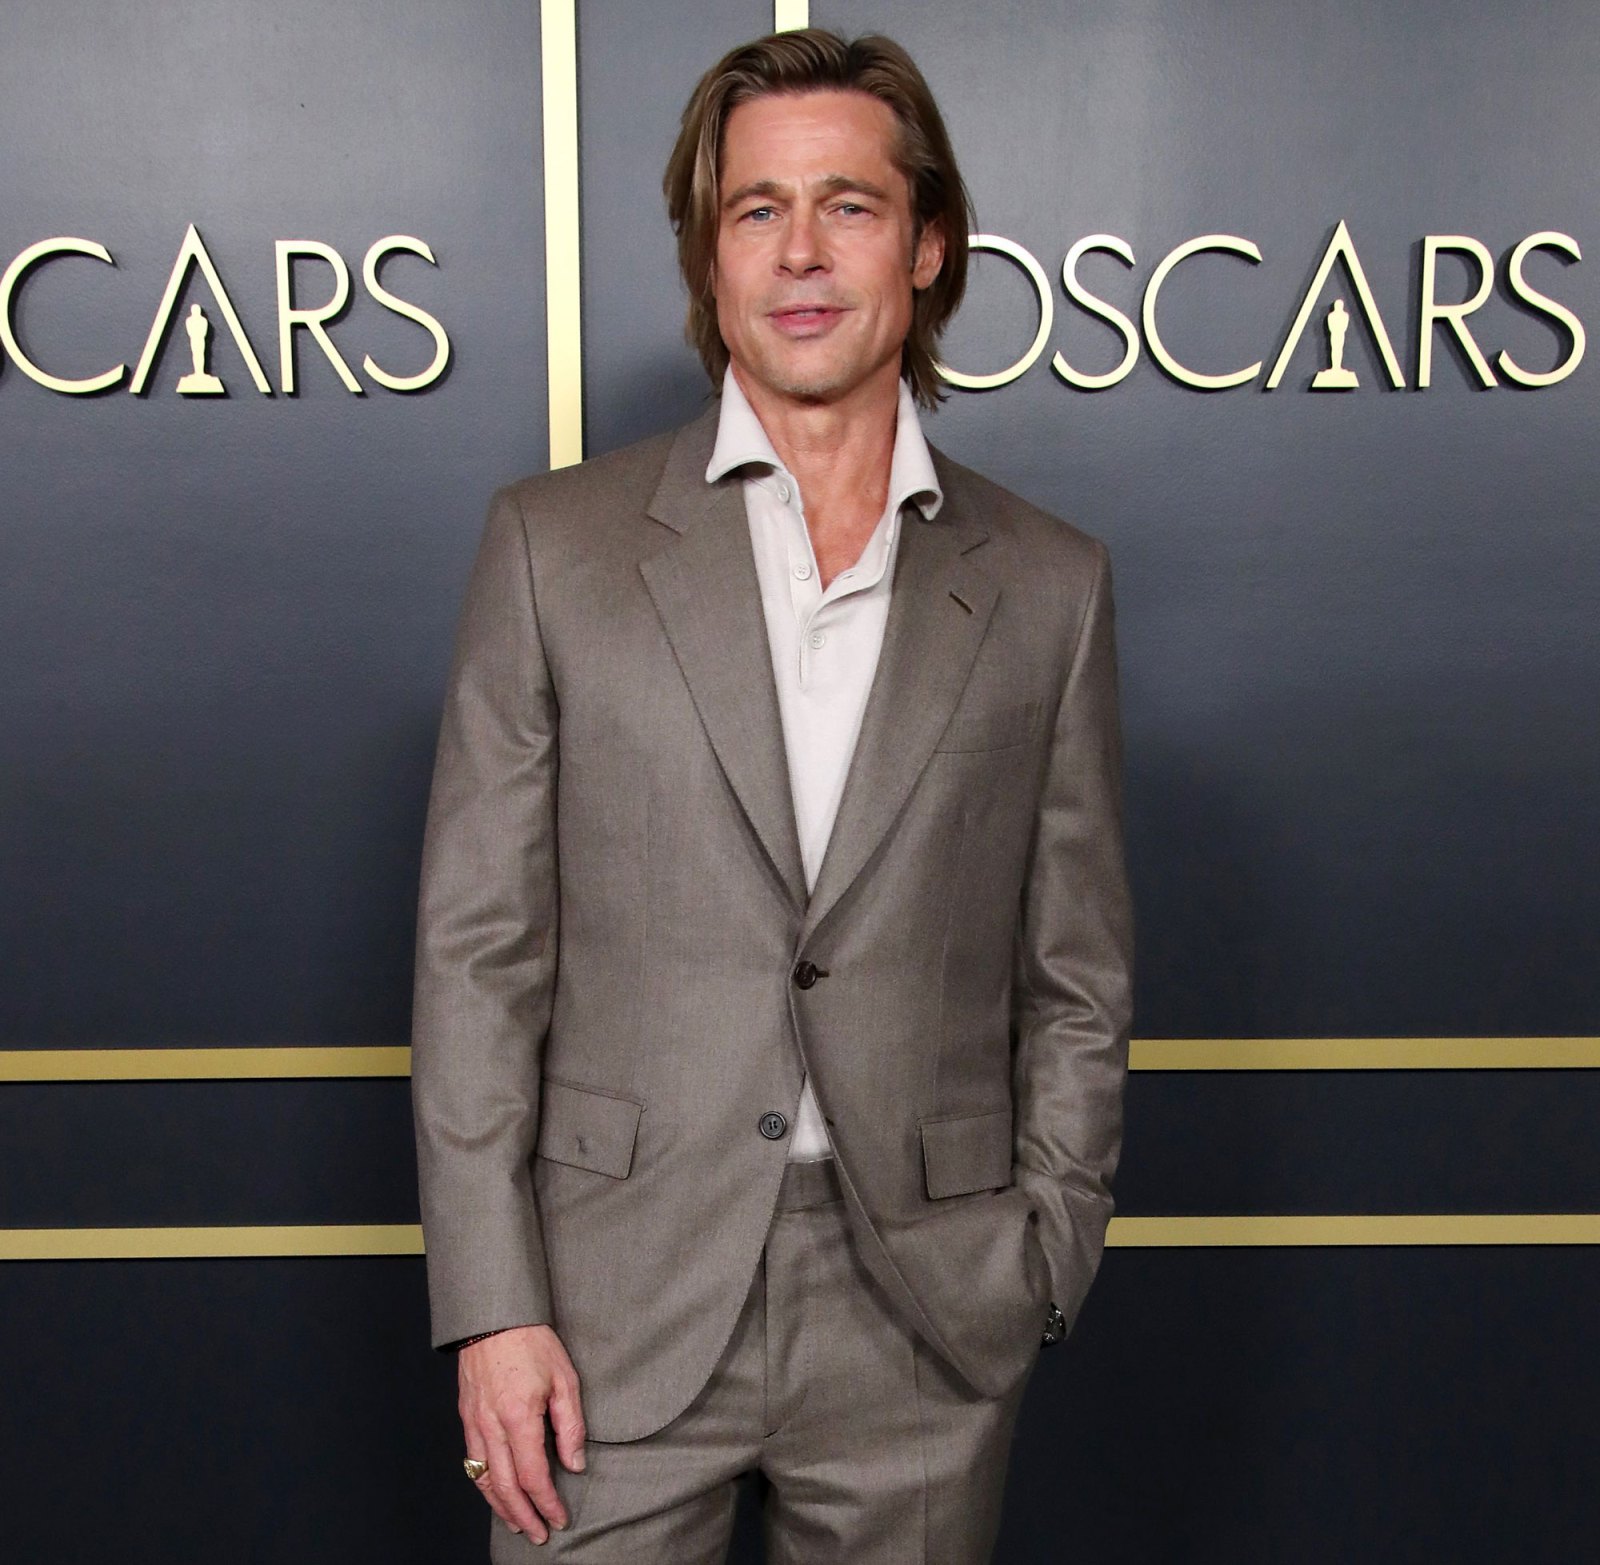 Brad Pitt Opens Up About Attending AA Quitting Cigarettes